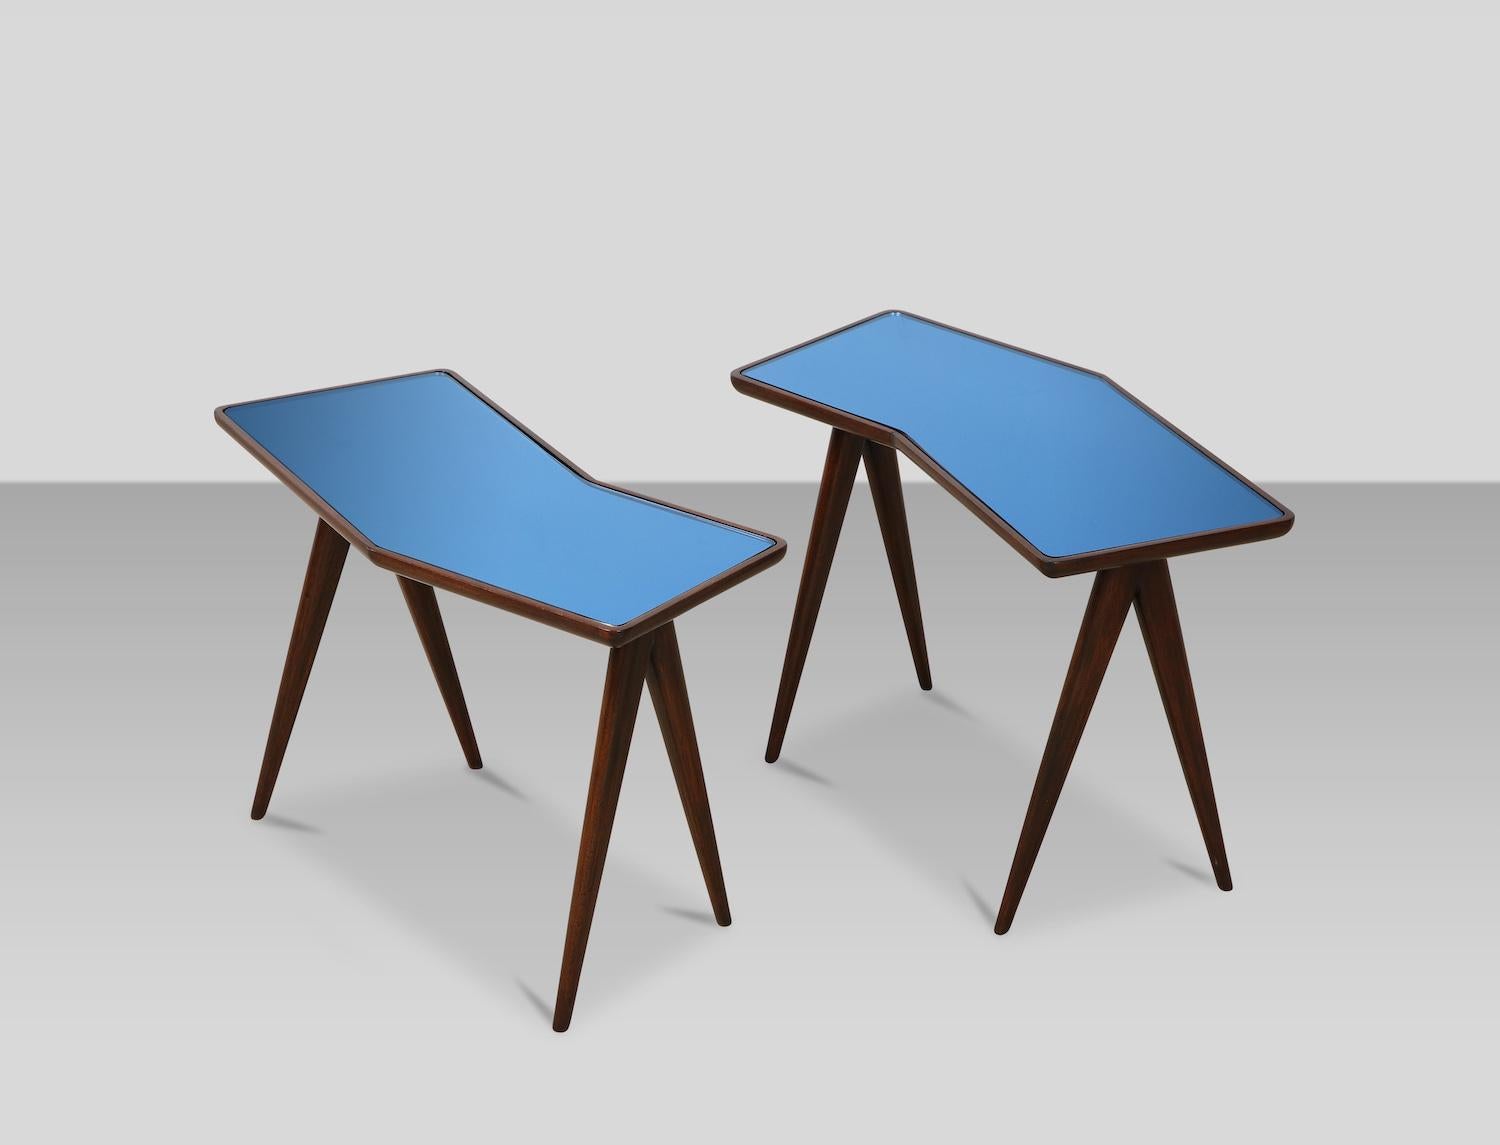 Rare pair of side tables by Gio Ponti & Pietro Chiesa. A collaborative design effort by Ponti & Chiesa, & produced by Fontana Arte. Petite pair of tables with compass legs, and angled tops inset with sapphire-blue mirror panels. Wood has recently